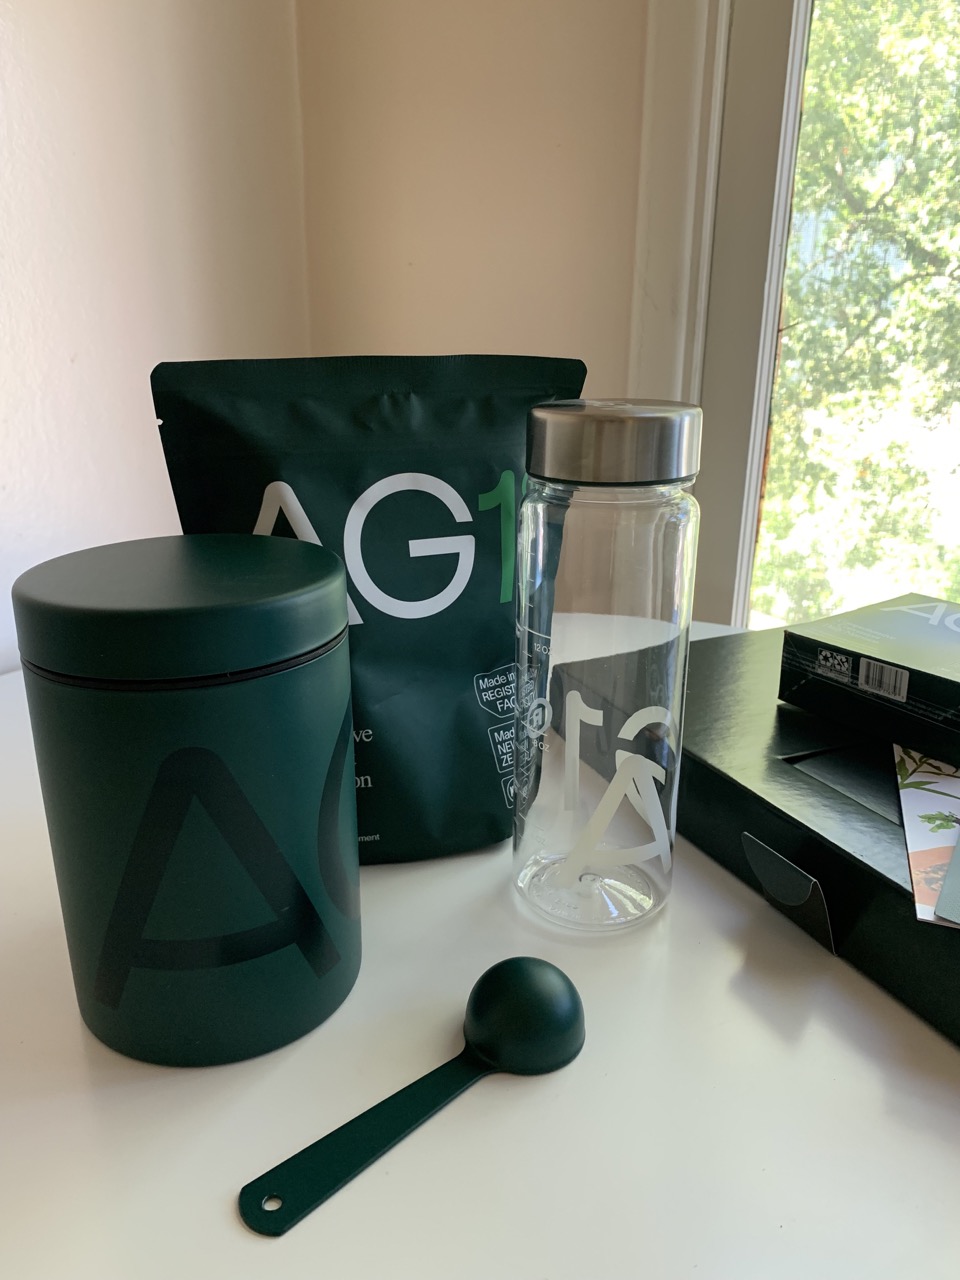 An image of the bag of AG1, the canister, metal scoop, and bottle that comes with the first purchase